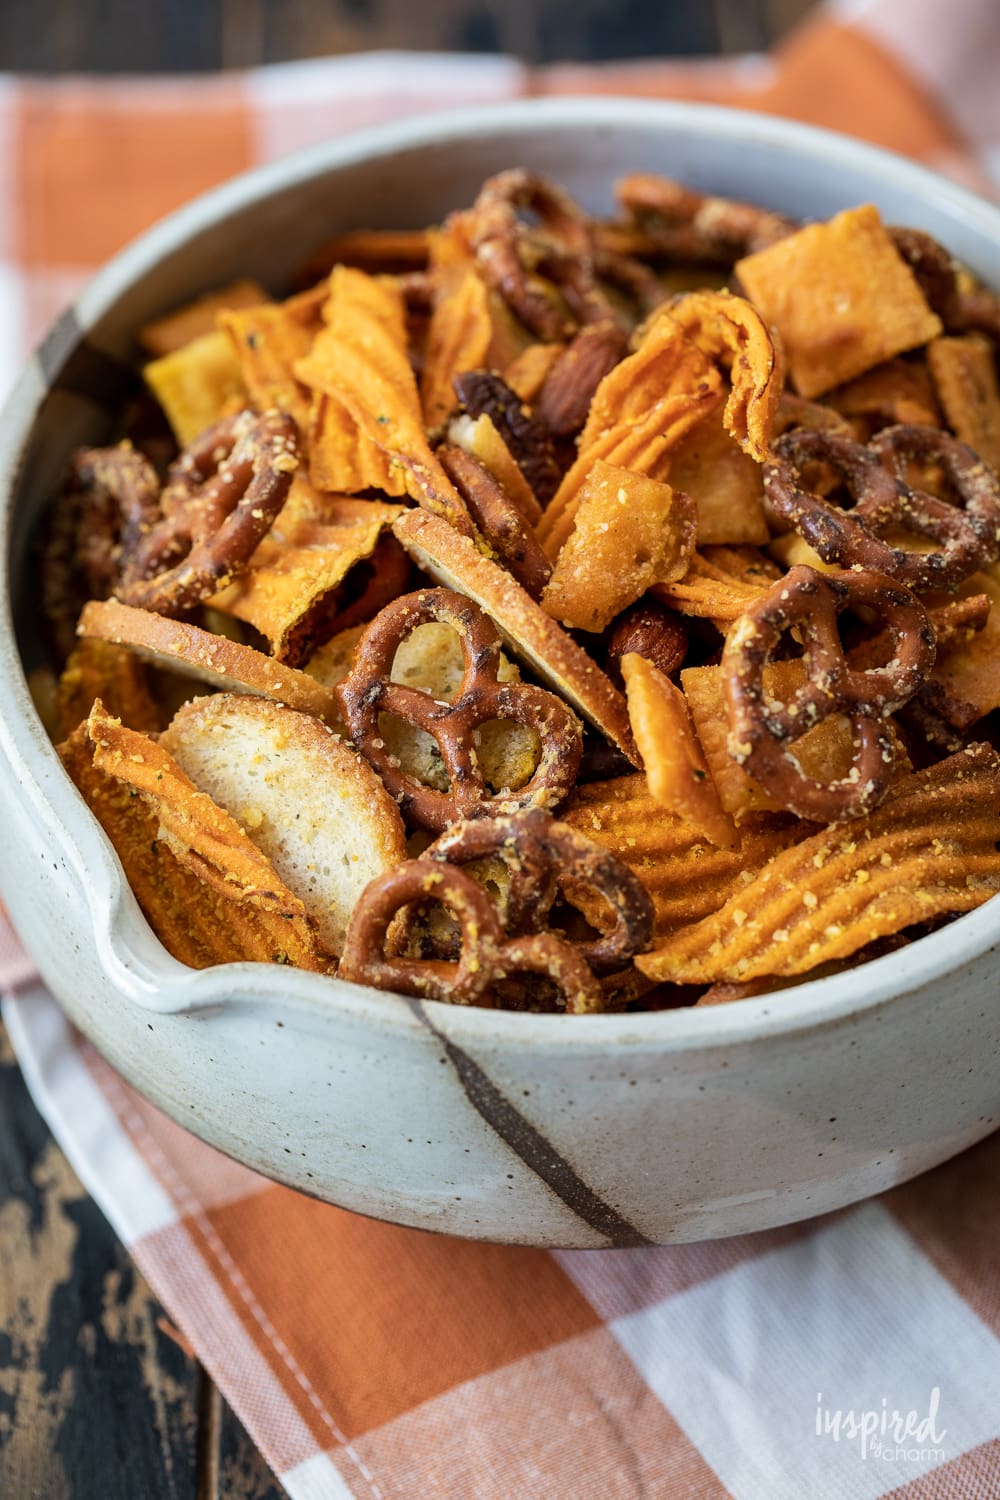 Parmesan ranch snack mix in a white bowl.